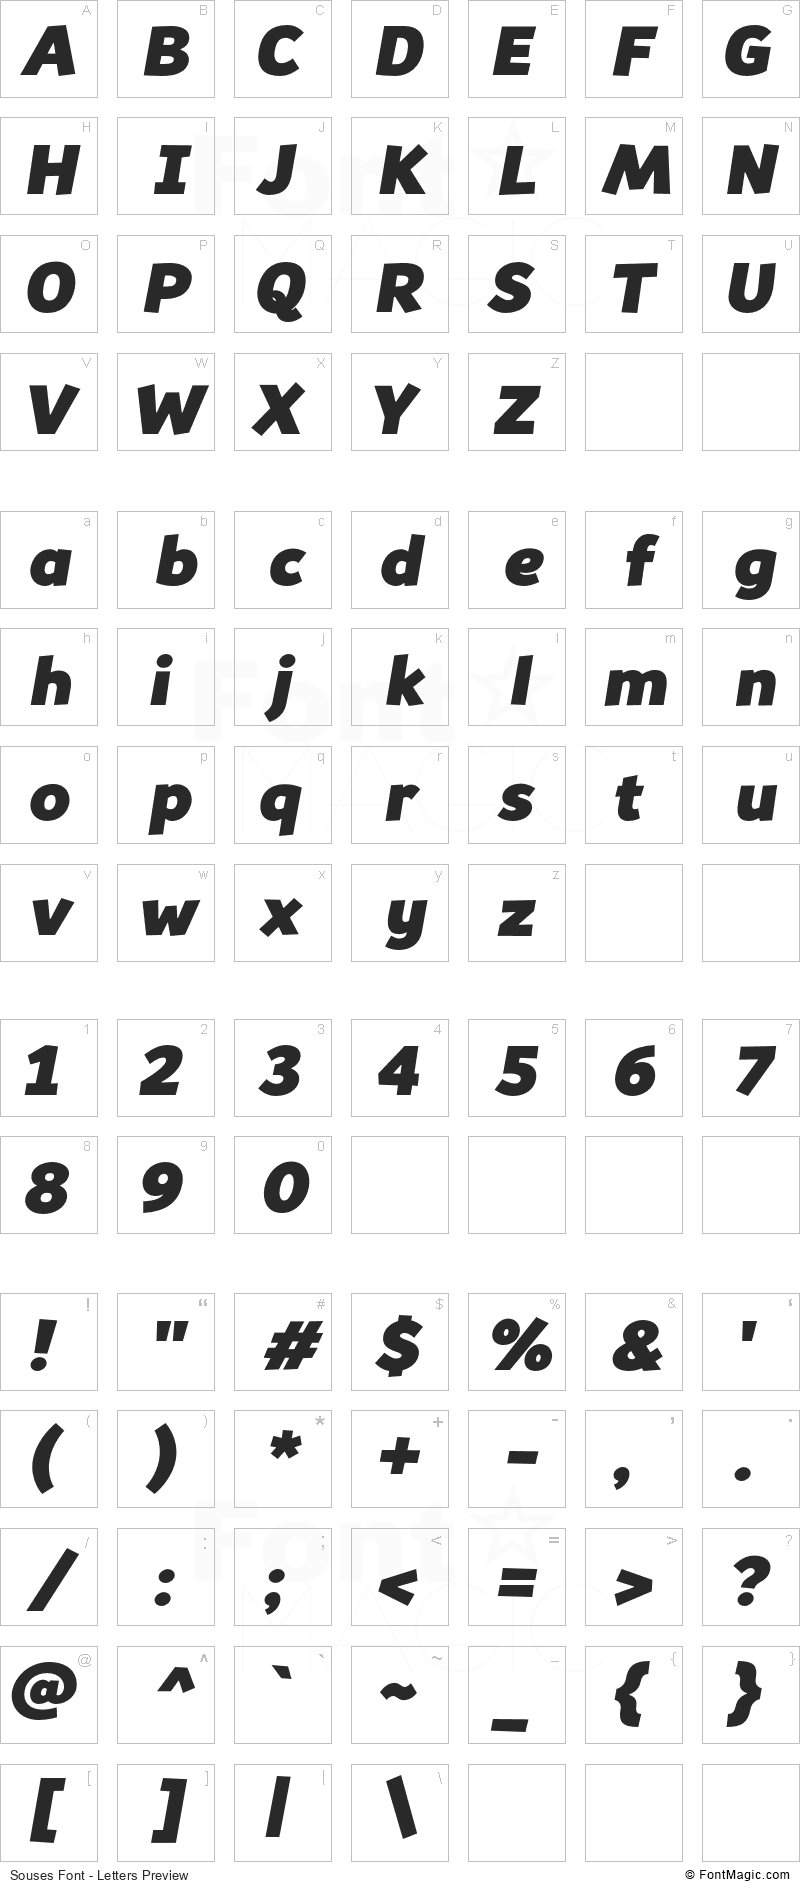 Souses Font - All Latters Preview Chart